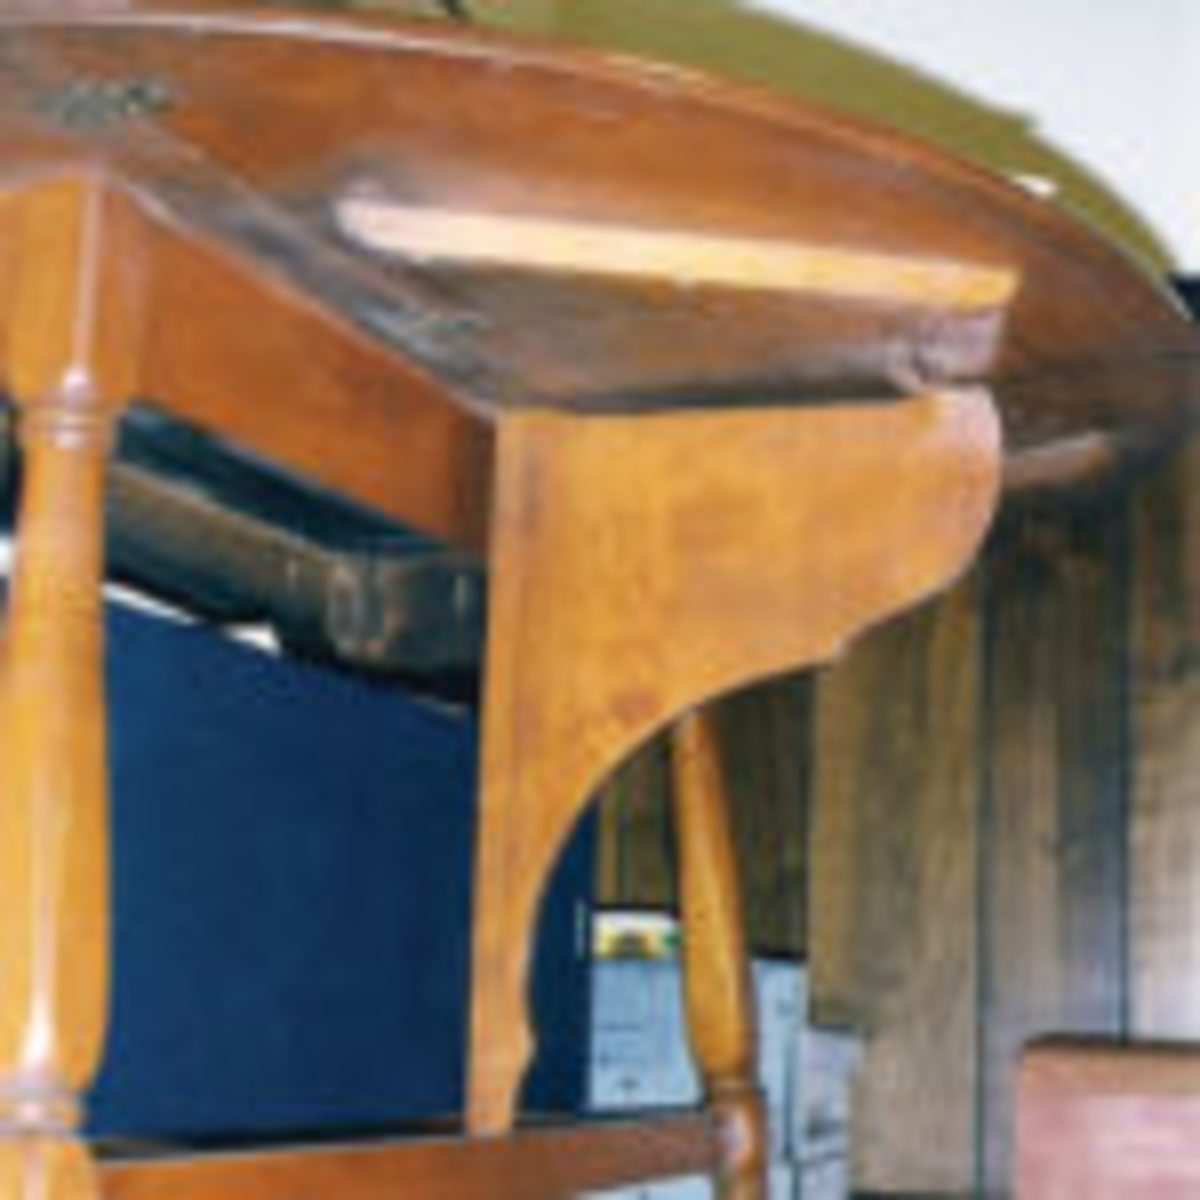 This reproduction shows the support mechanism of an early eighteenth century butterfly drop leaf table.